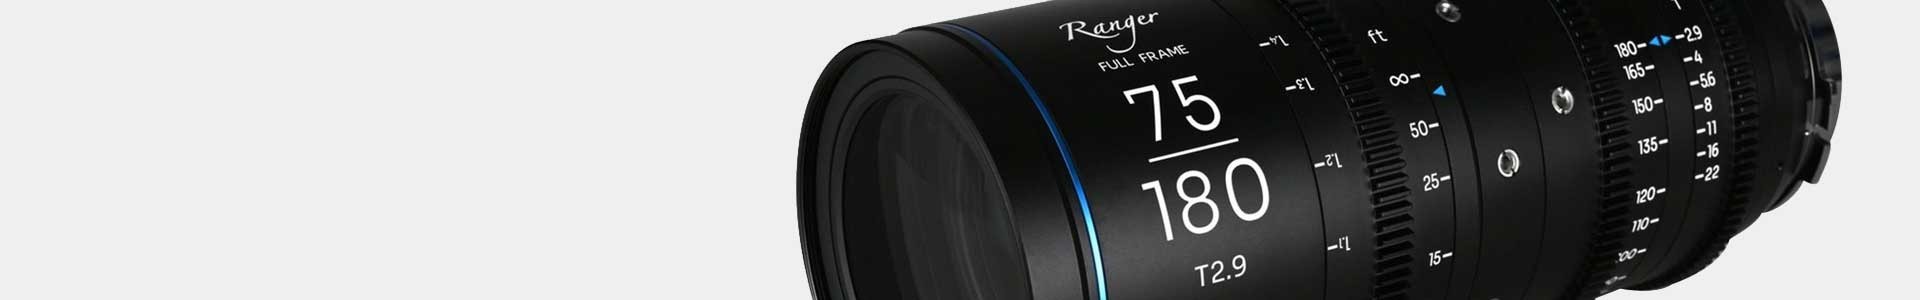 Laowa - Professional lenses for film and photography - Avacab